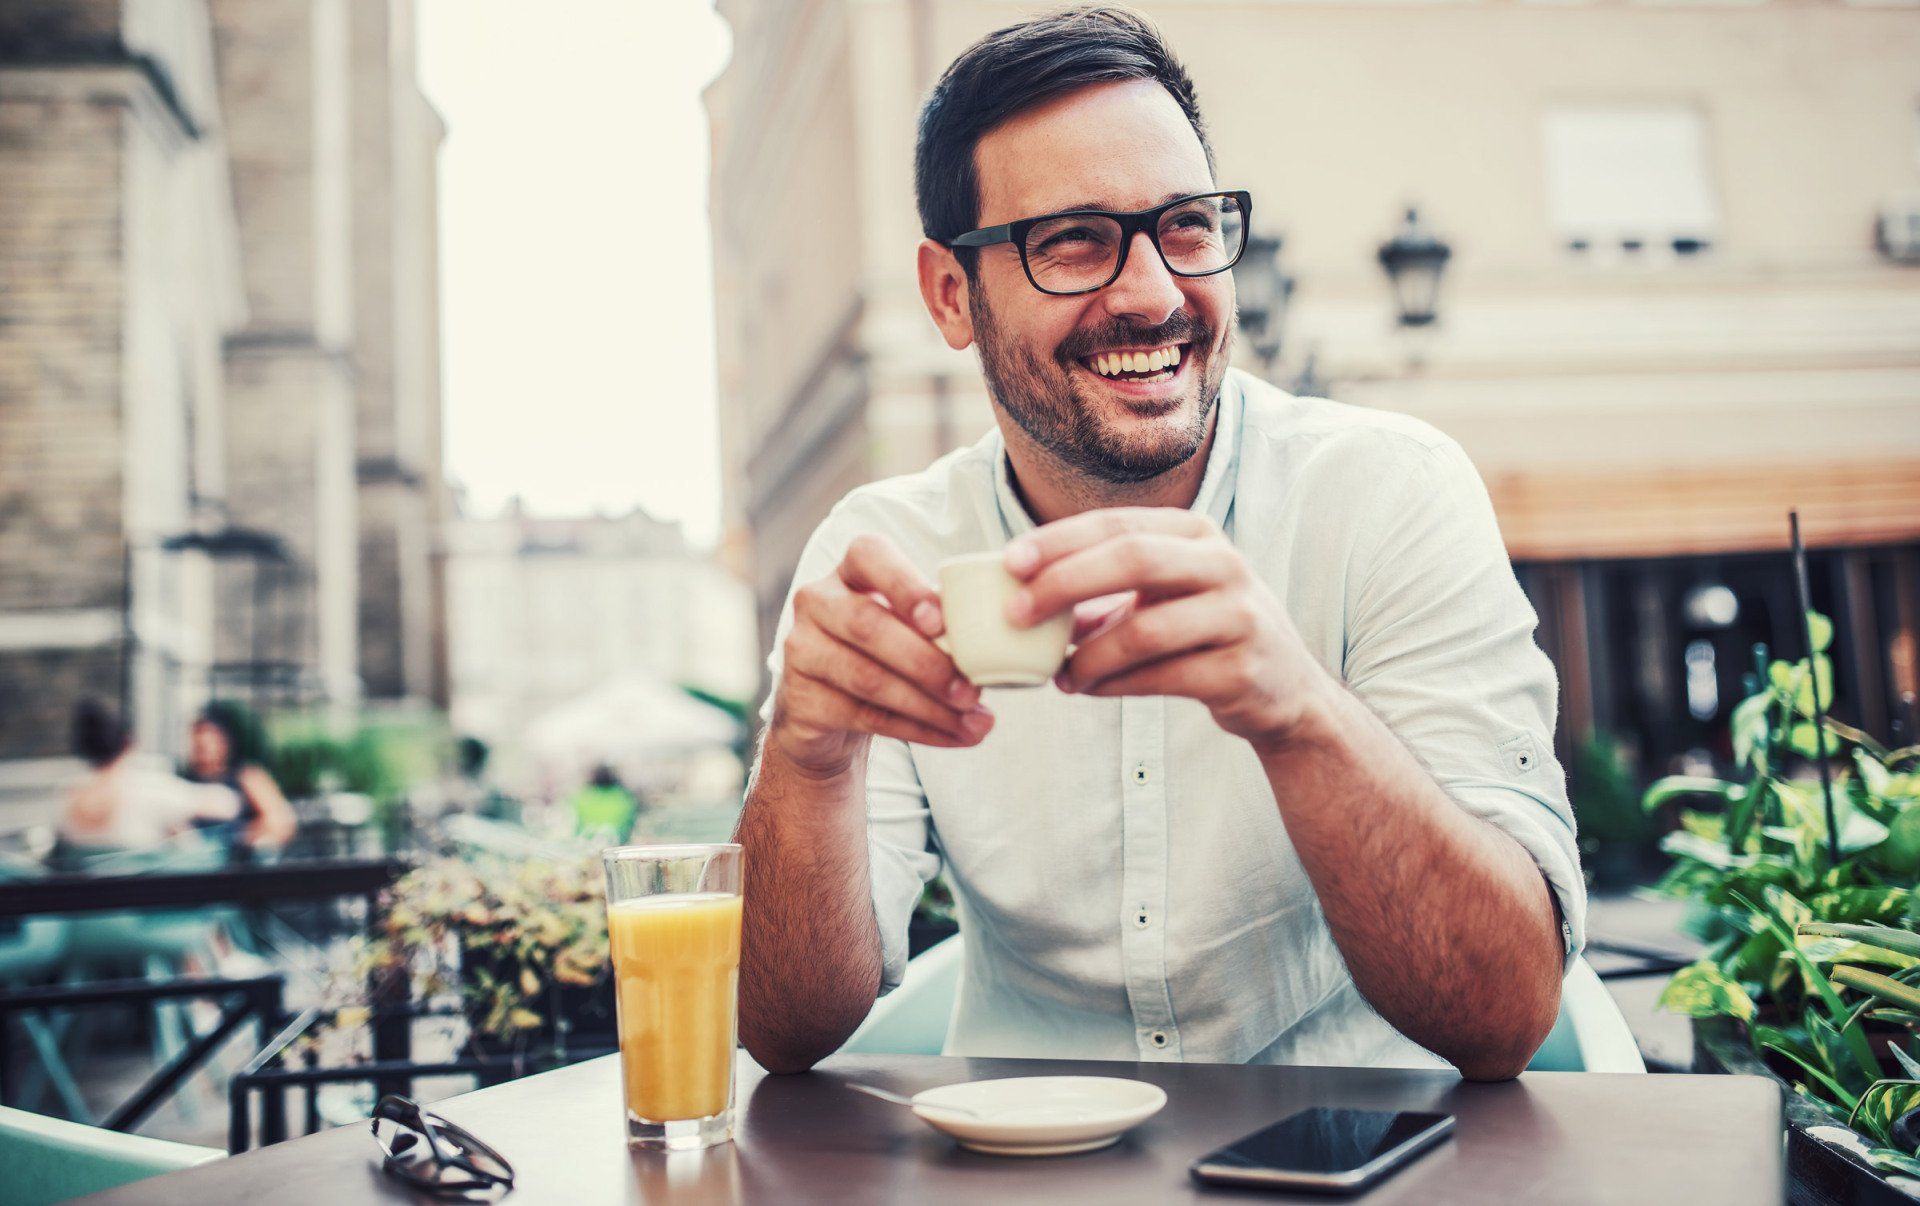 Man in glasses laughs while drinking coffee